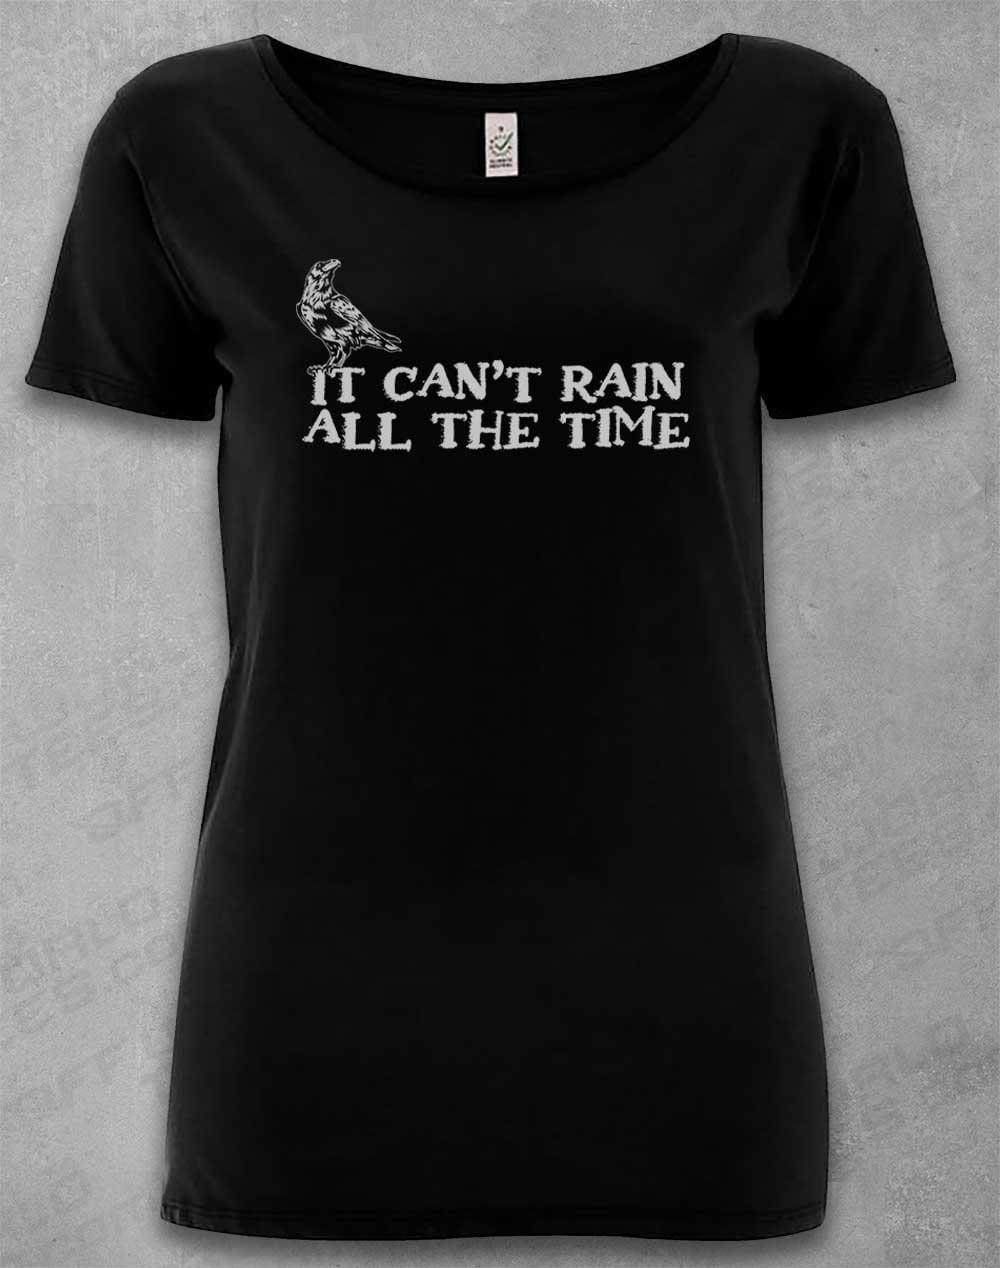 DELUXE It Can't Rain All the Time Organic Scoop Neck T-Shirt 8-10 / Black  - Off World Tees